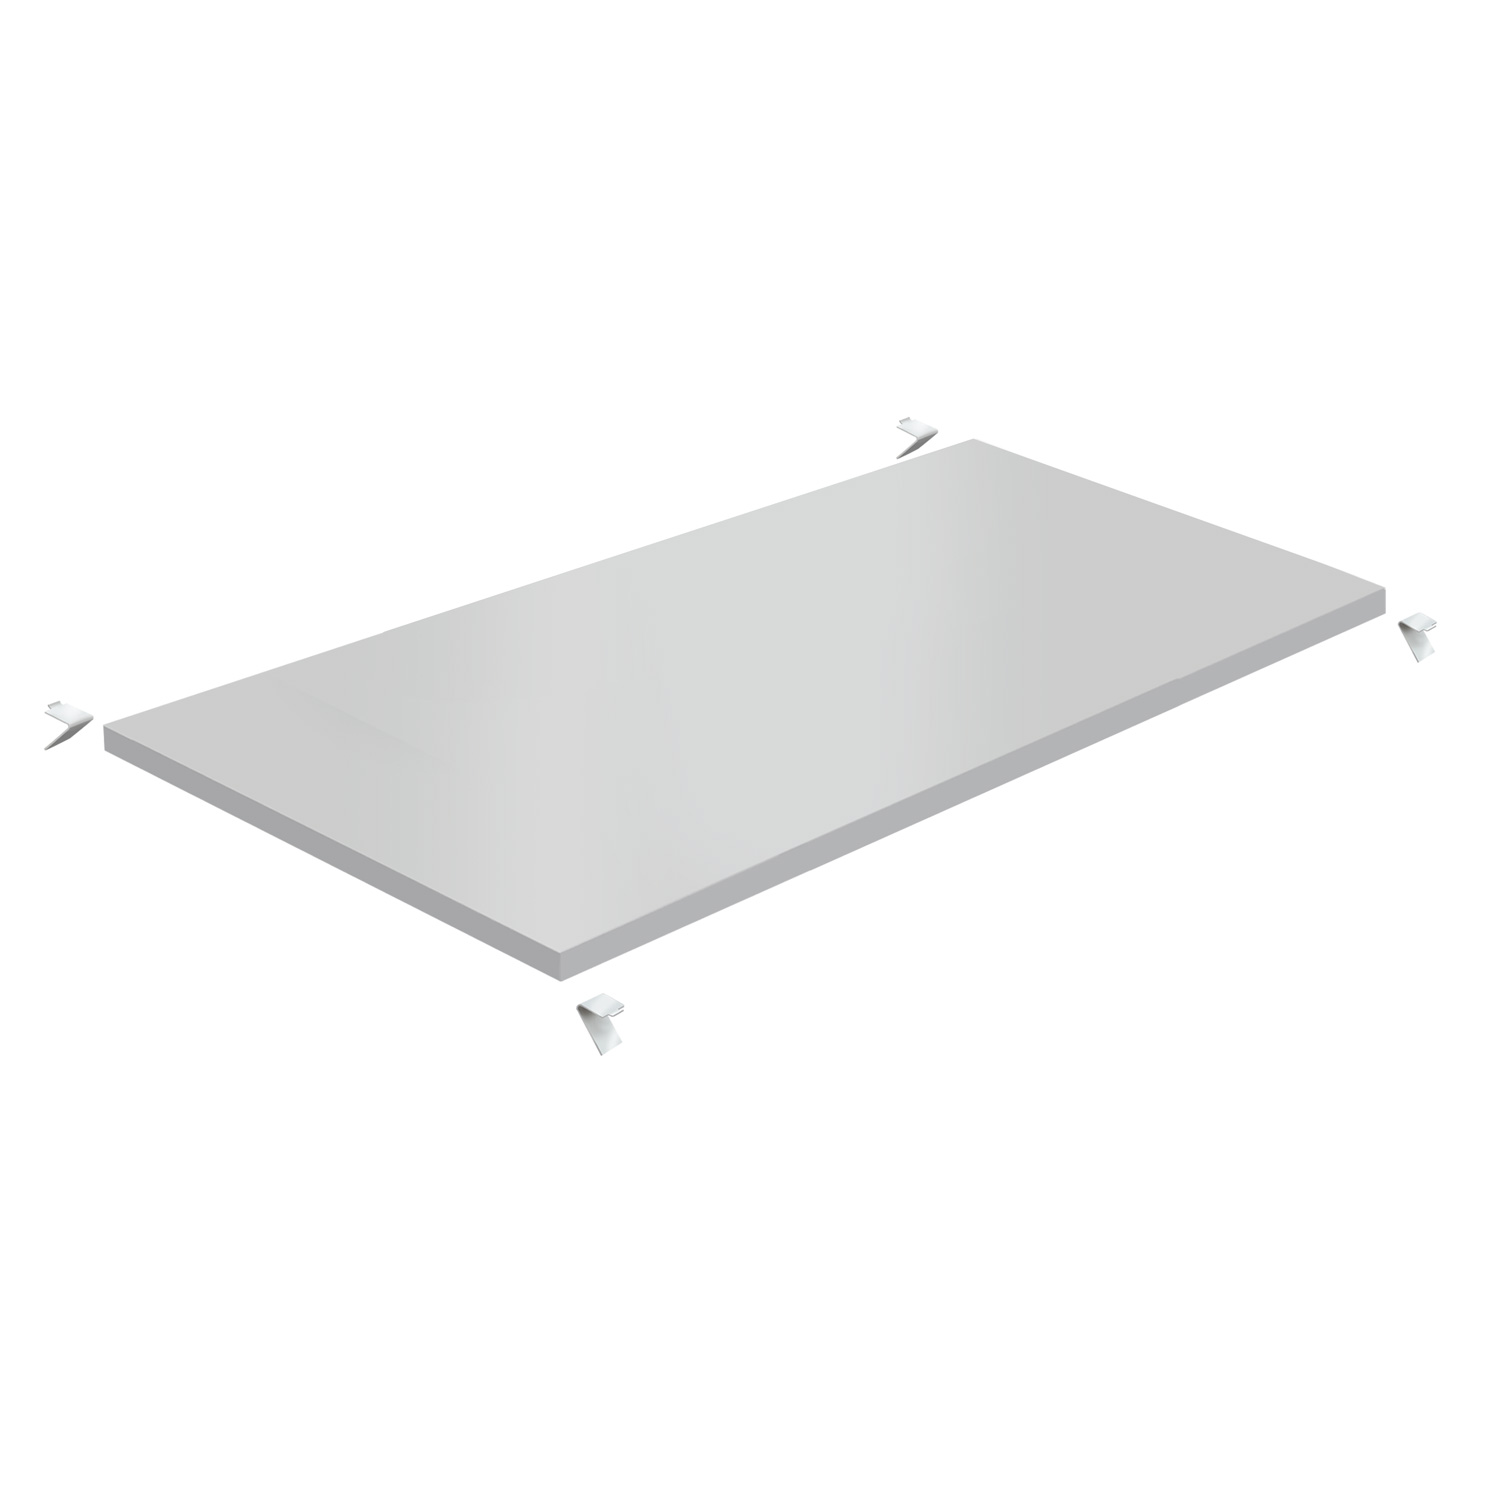 Additional shelf for BU-120, RS-060 or RS-062